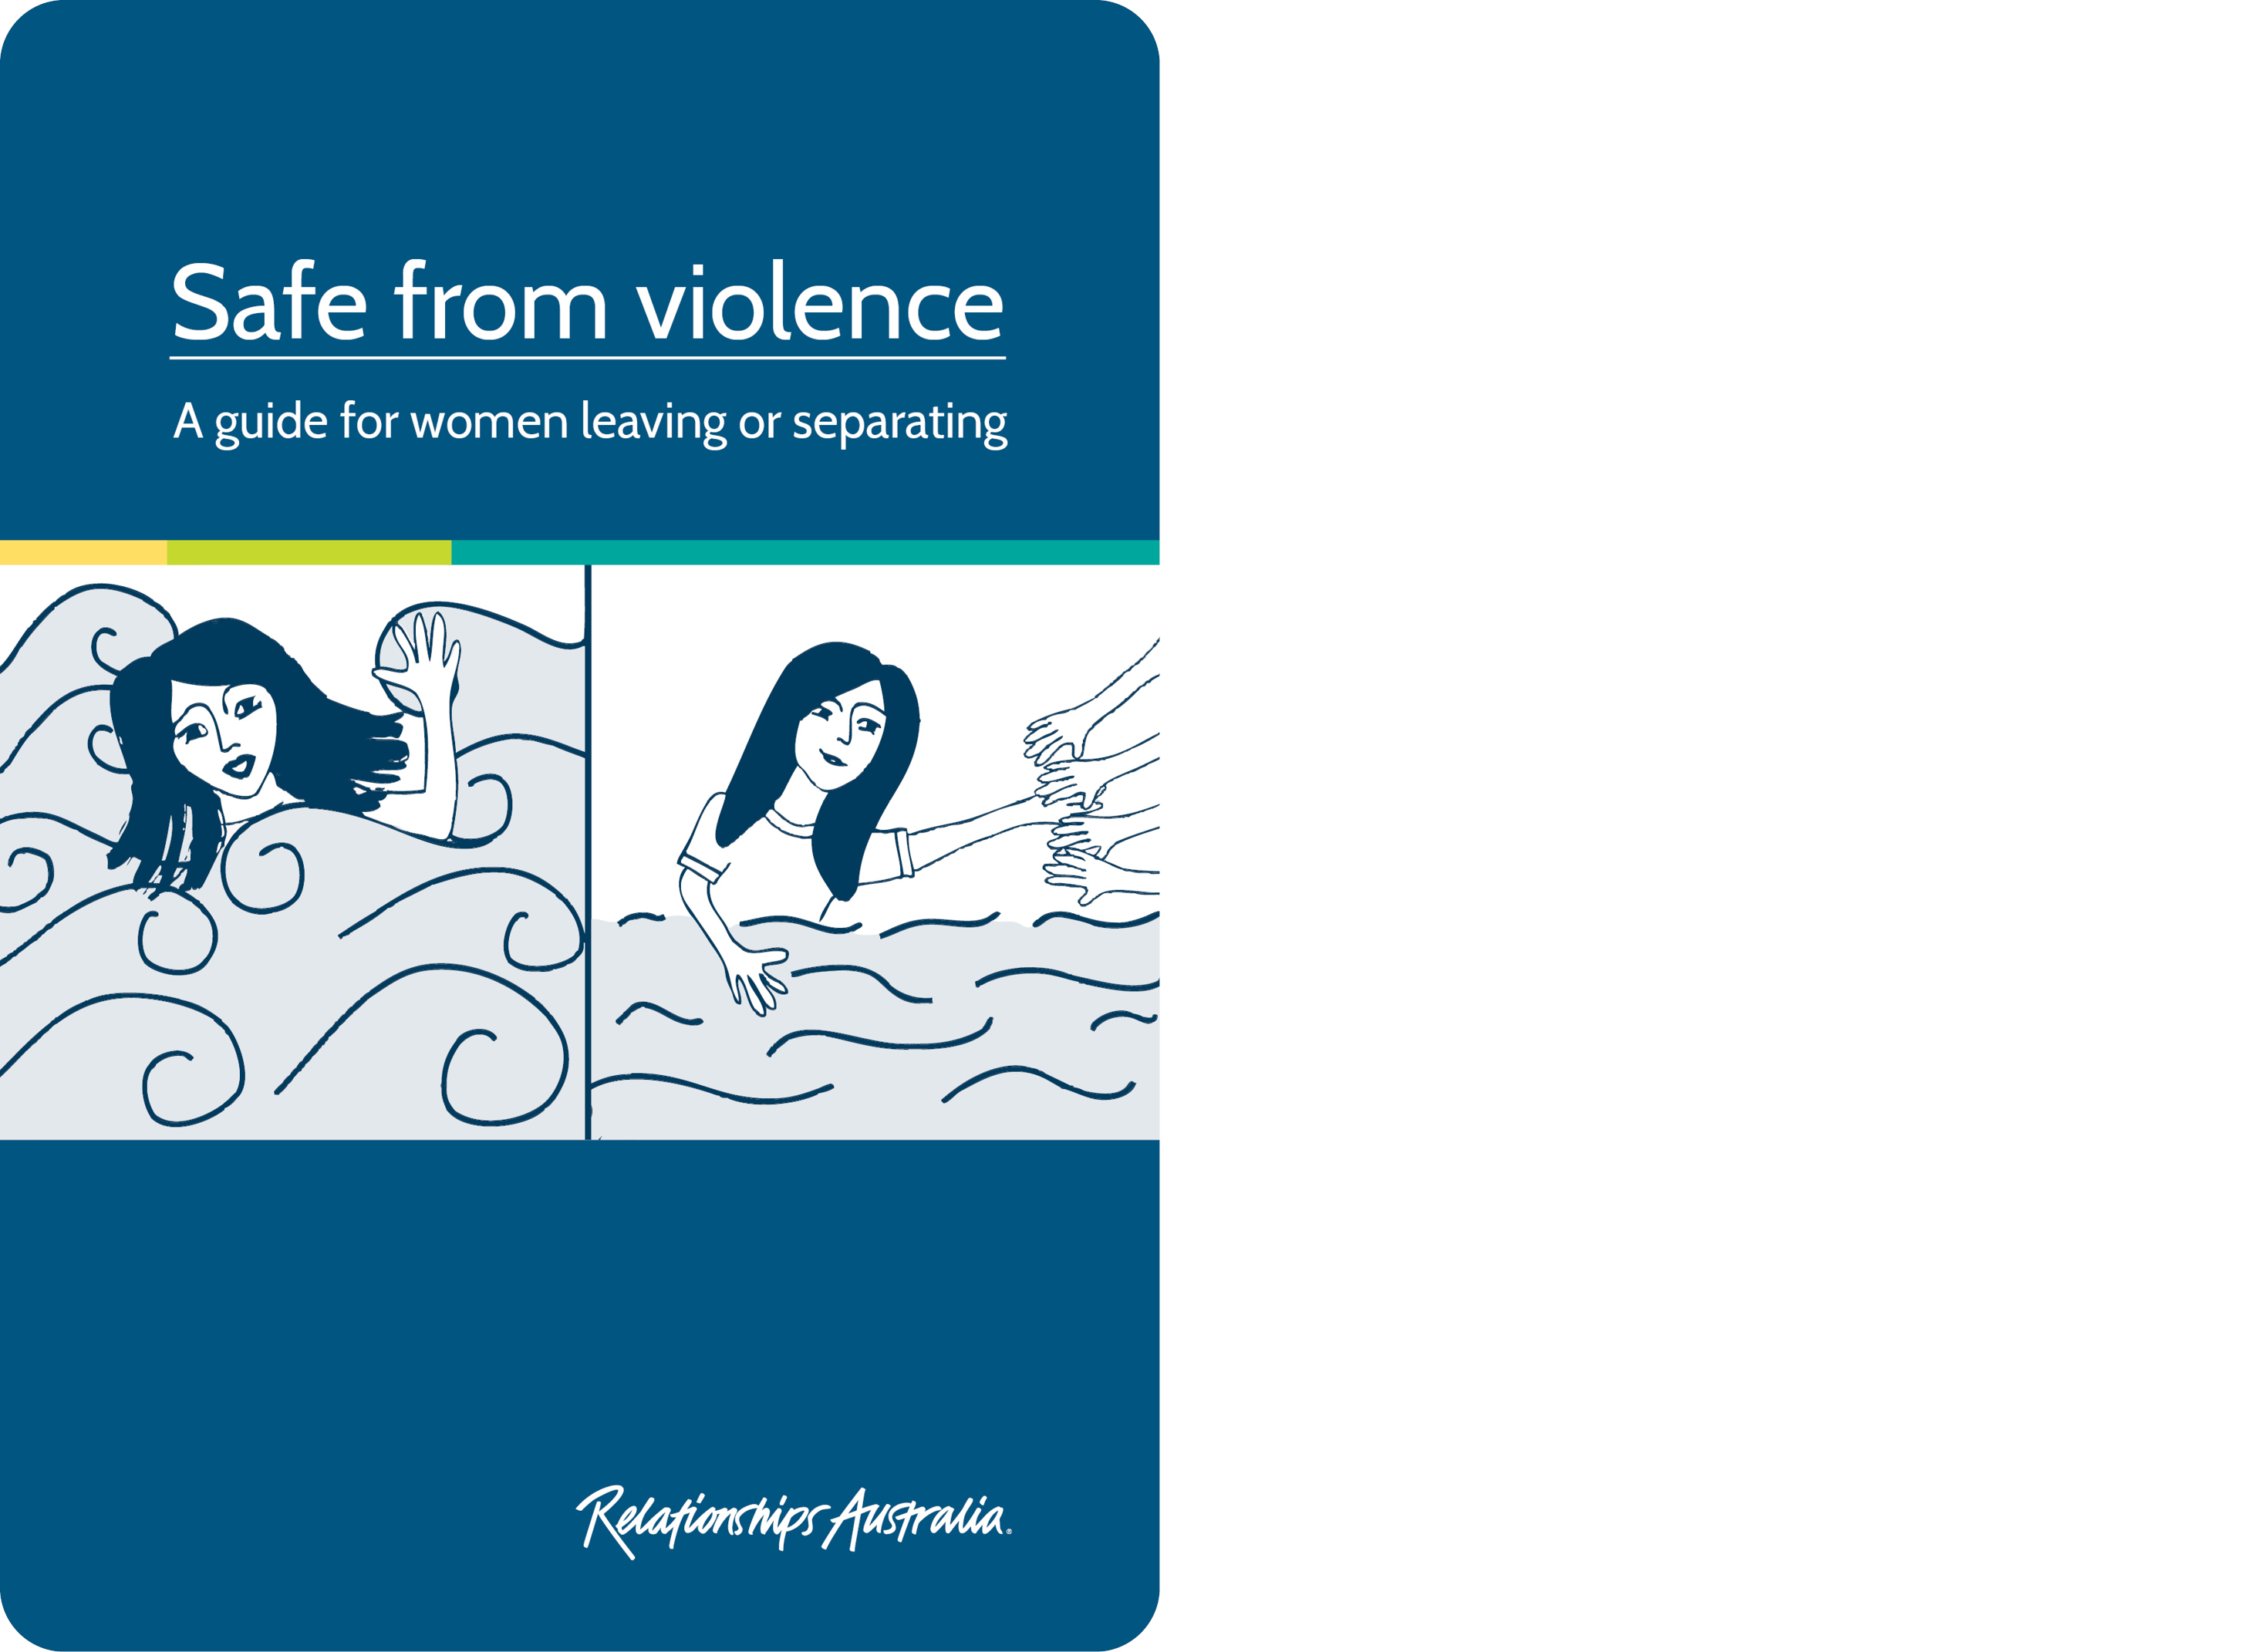 The front cover of the booklet which shows the text 'Safe from violence - a guide for women leaving or separating', an illustration of hands reaching down to pull a woman out of choppy water, and the Relationships Australia logo